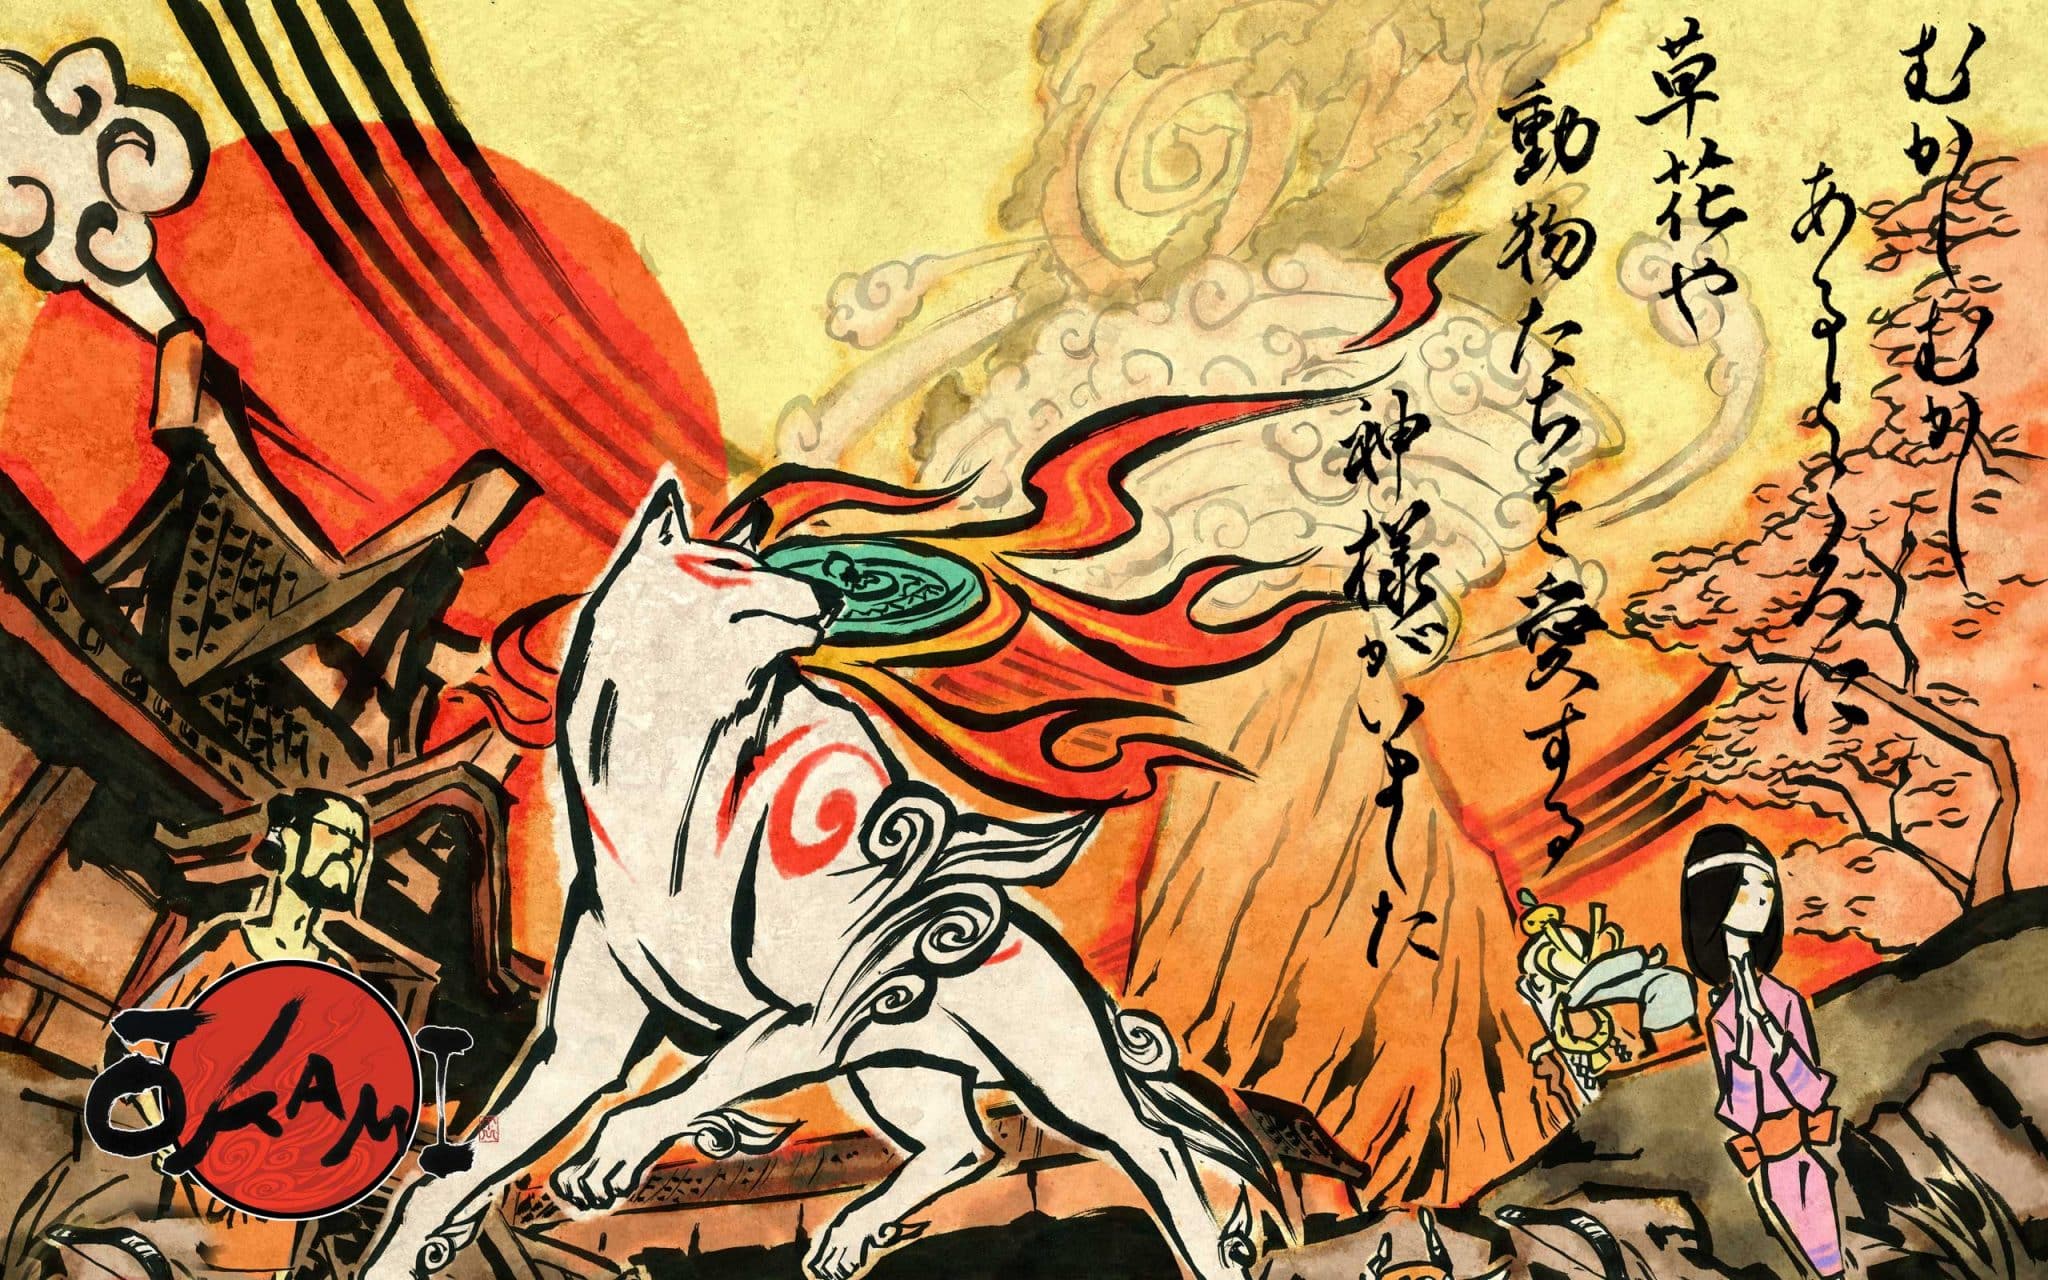 Old But Gold #130 - Okami 3